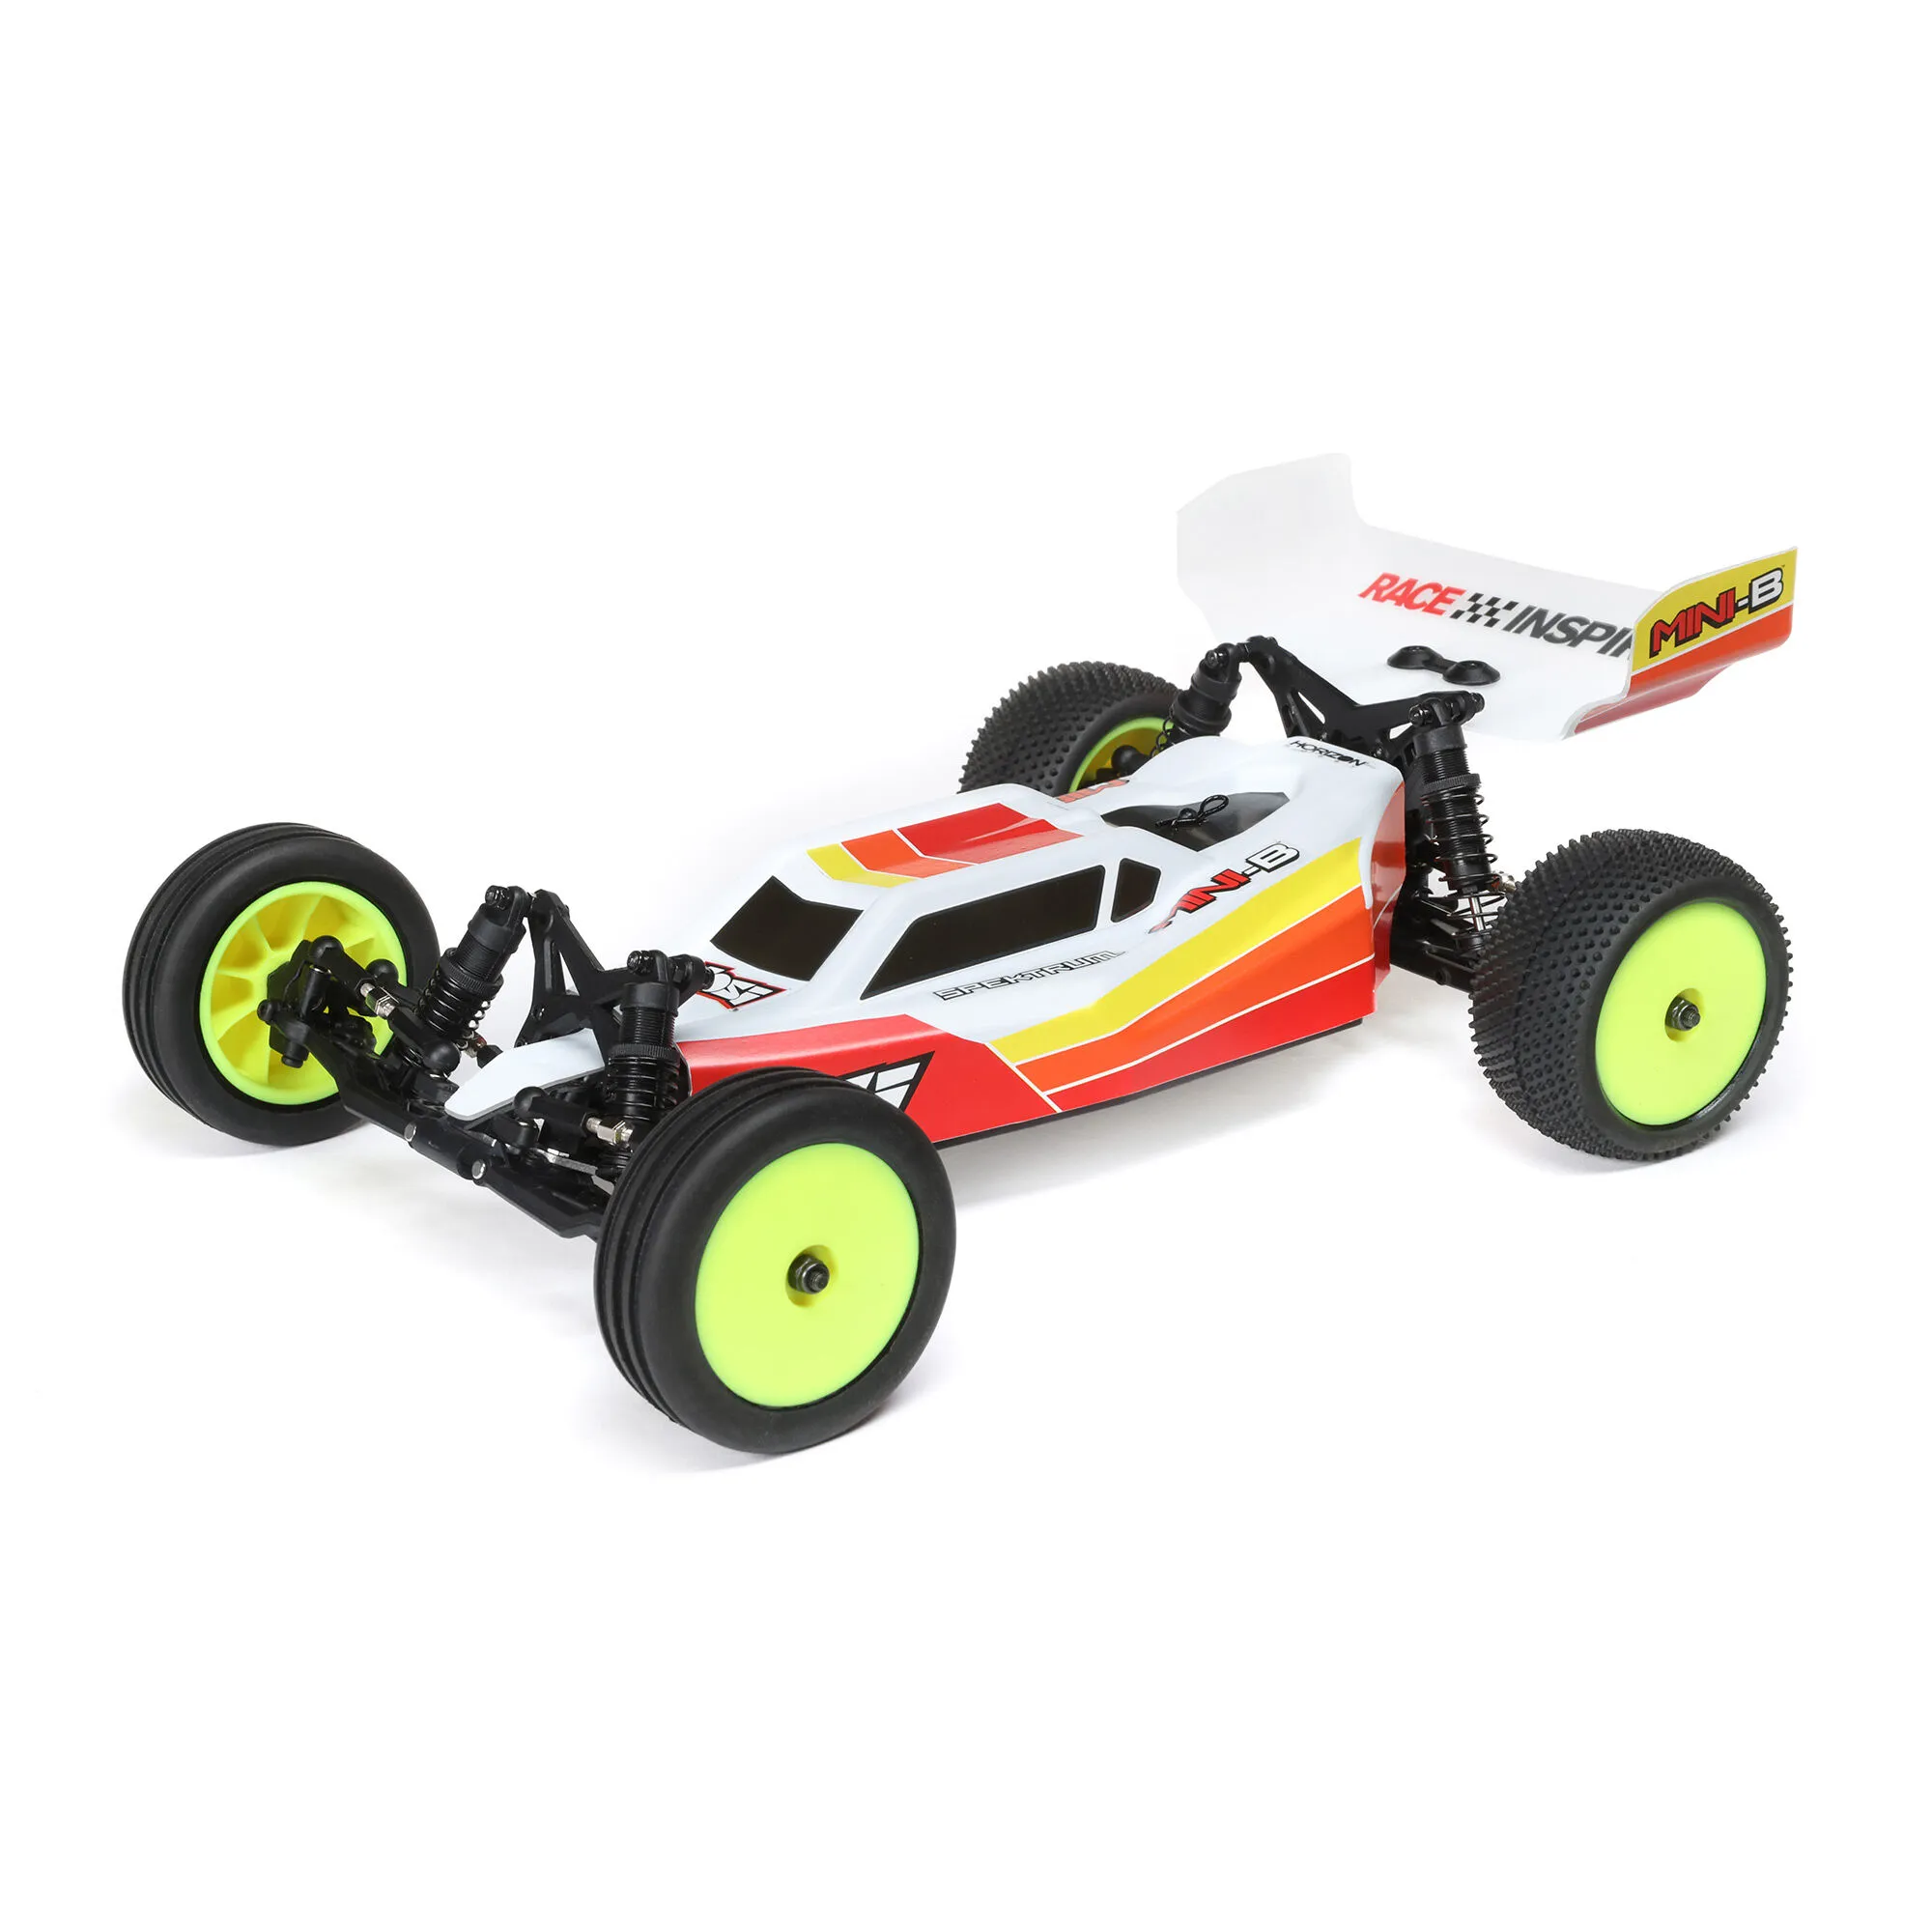 Losi Mini-B 1/16 Brushless 2WD Buggy RTR, Red, LOS01024T1